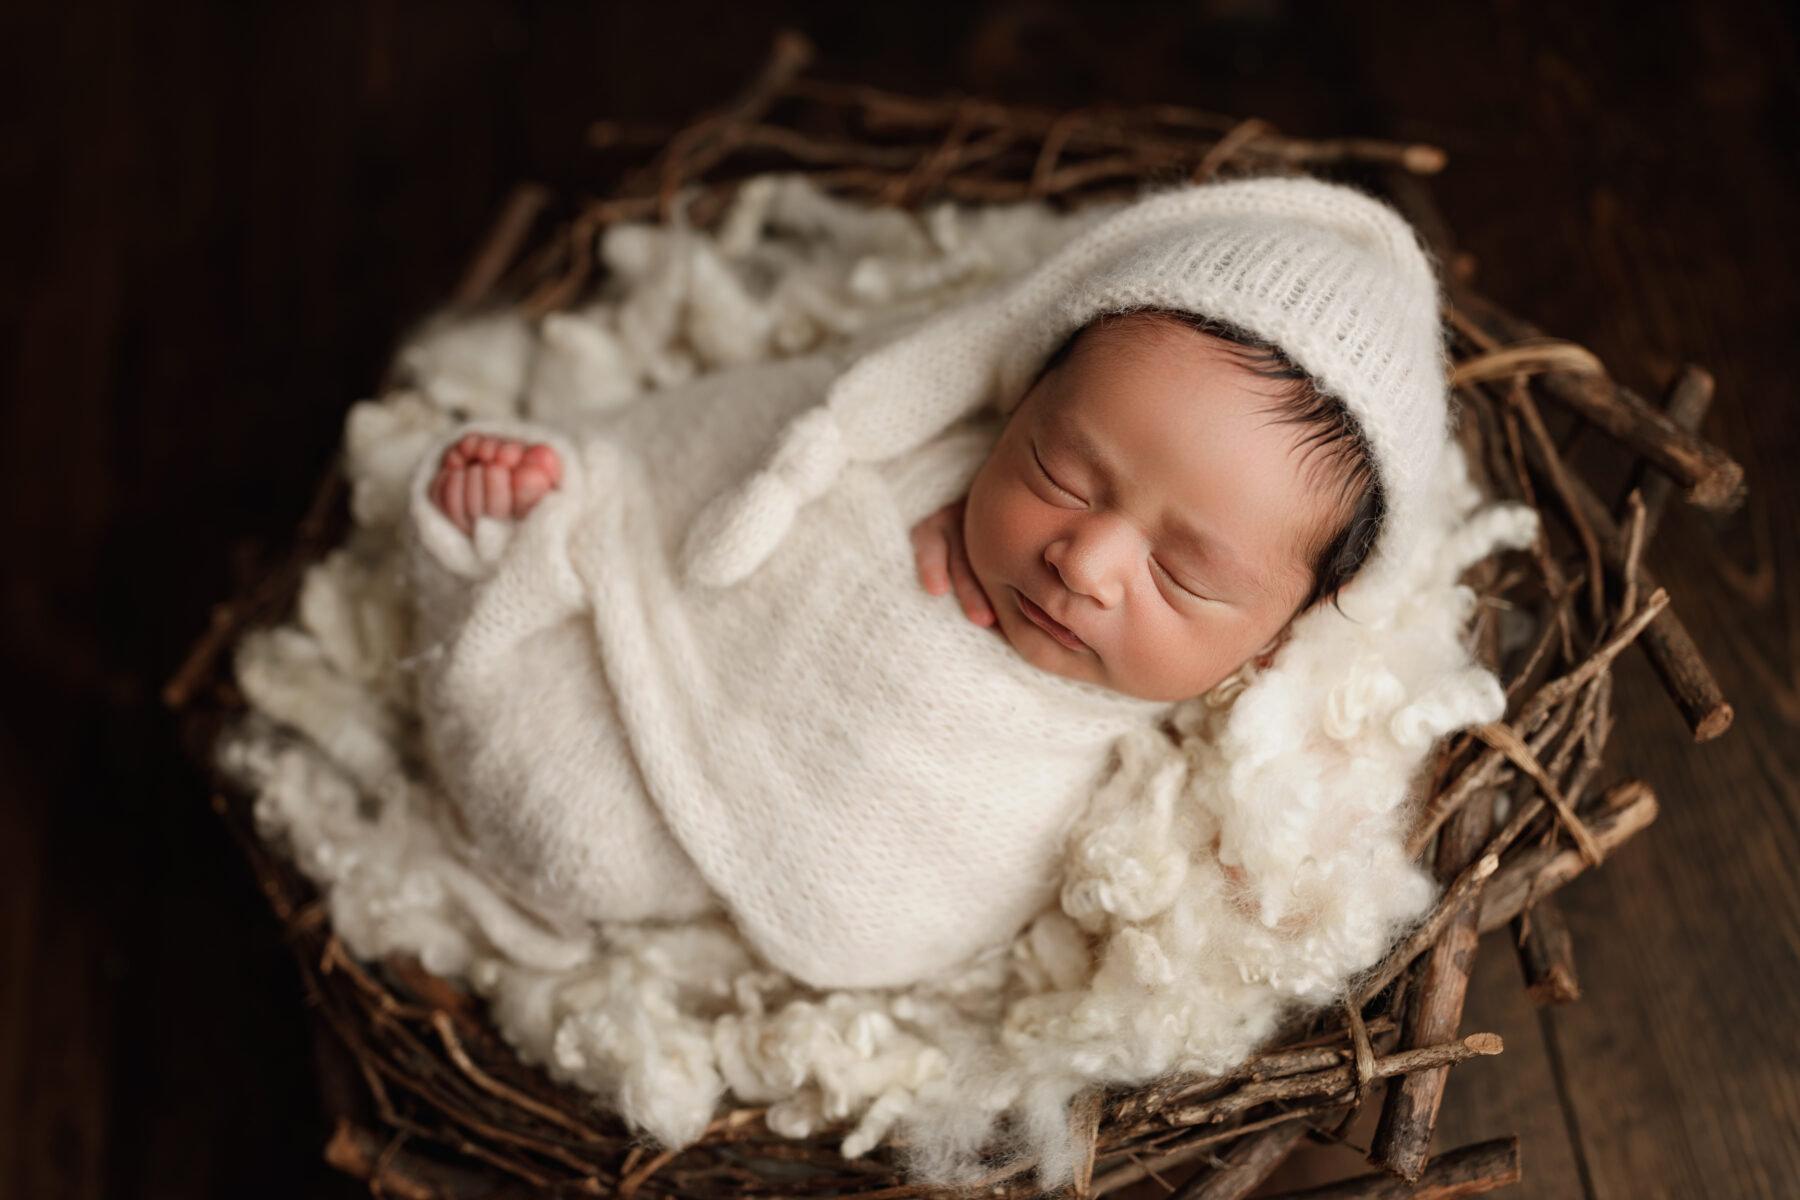 Newborn session with Evie Lynn Photography | Nashville Baby Guide